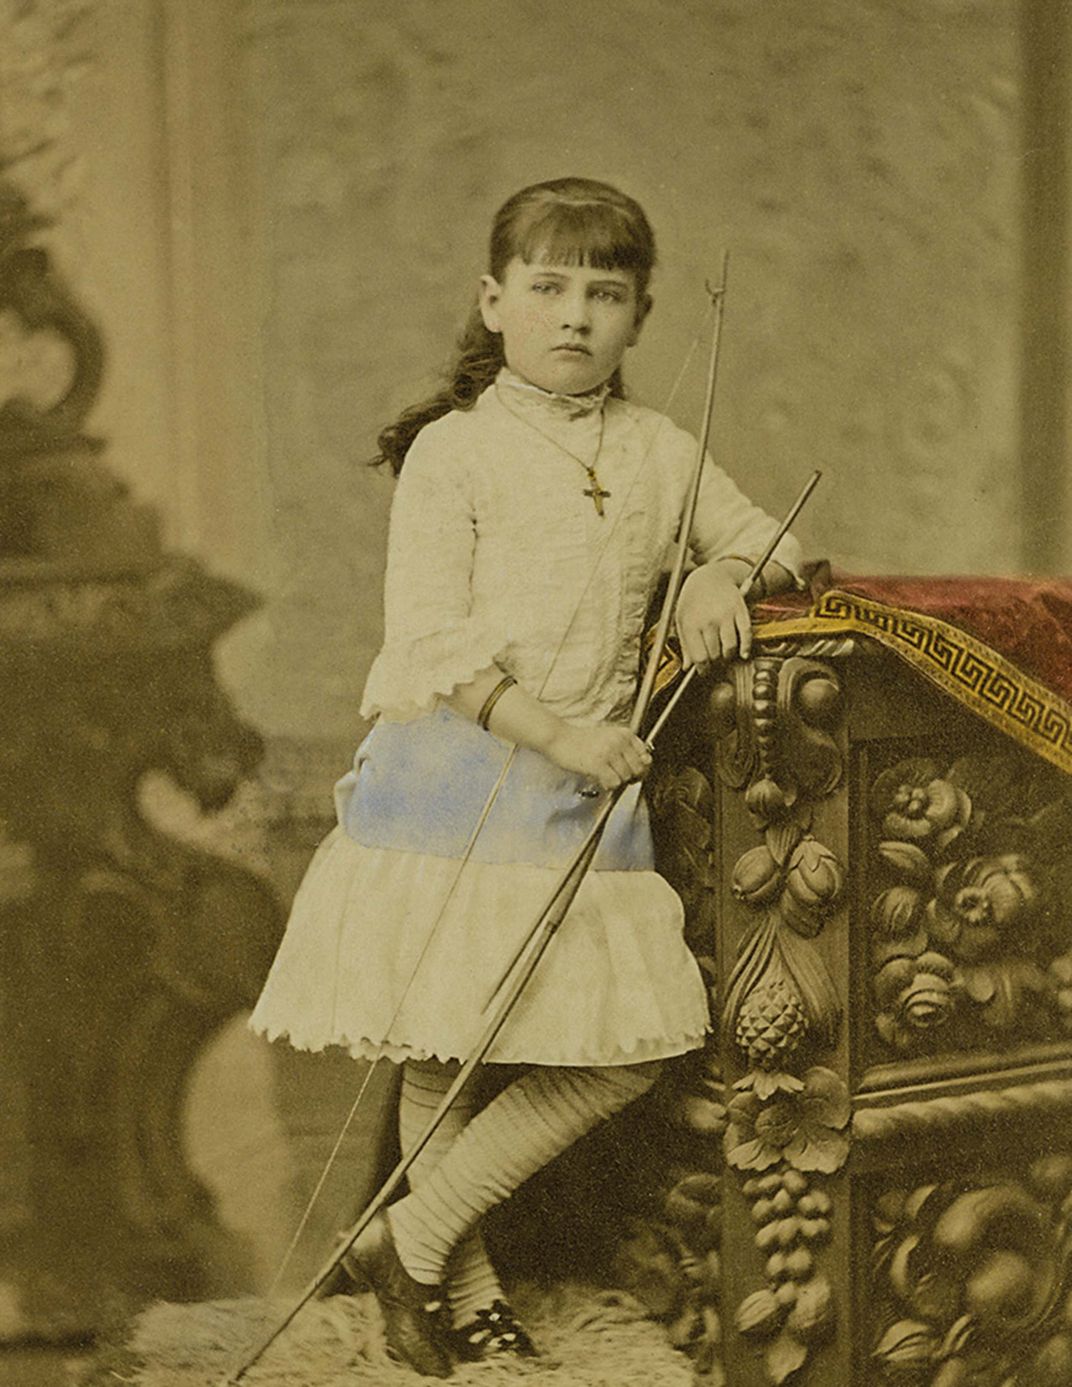 a vintage sepia toned photograph of a young girl standing